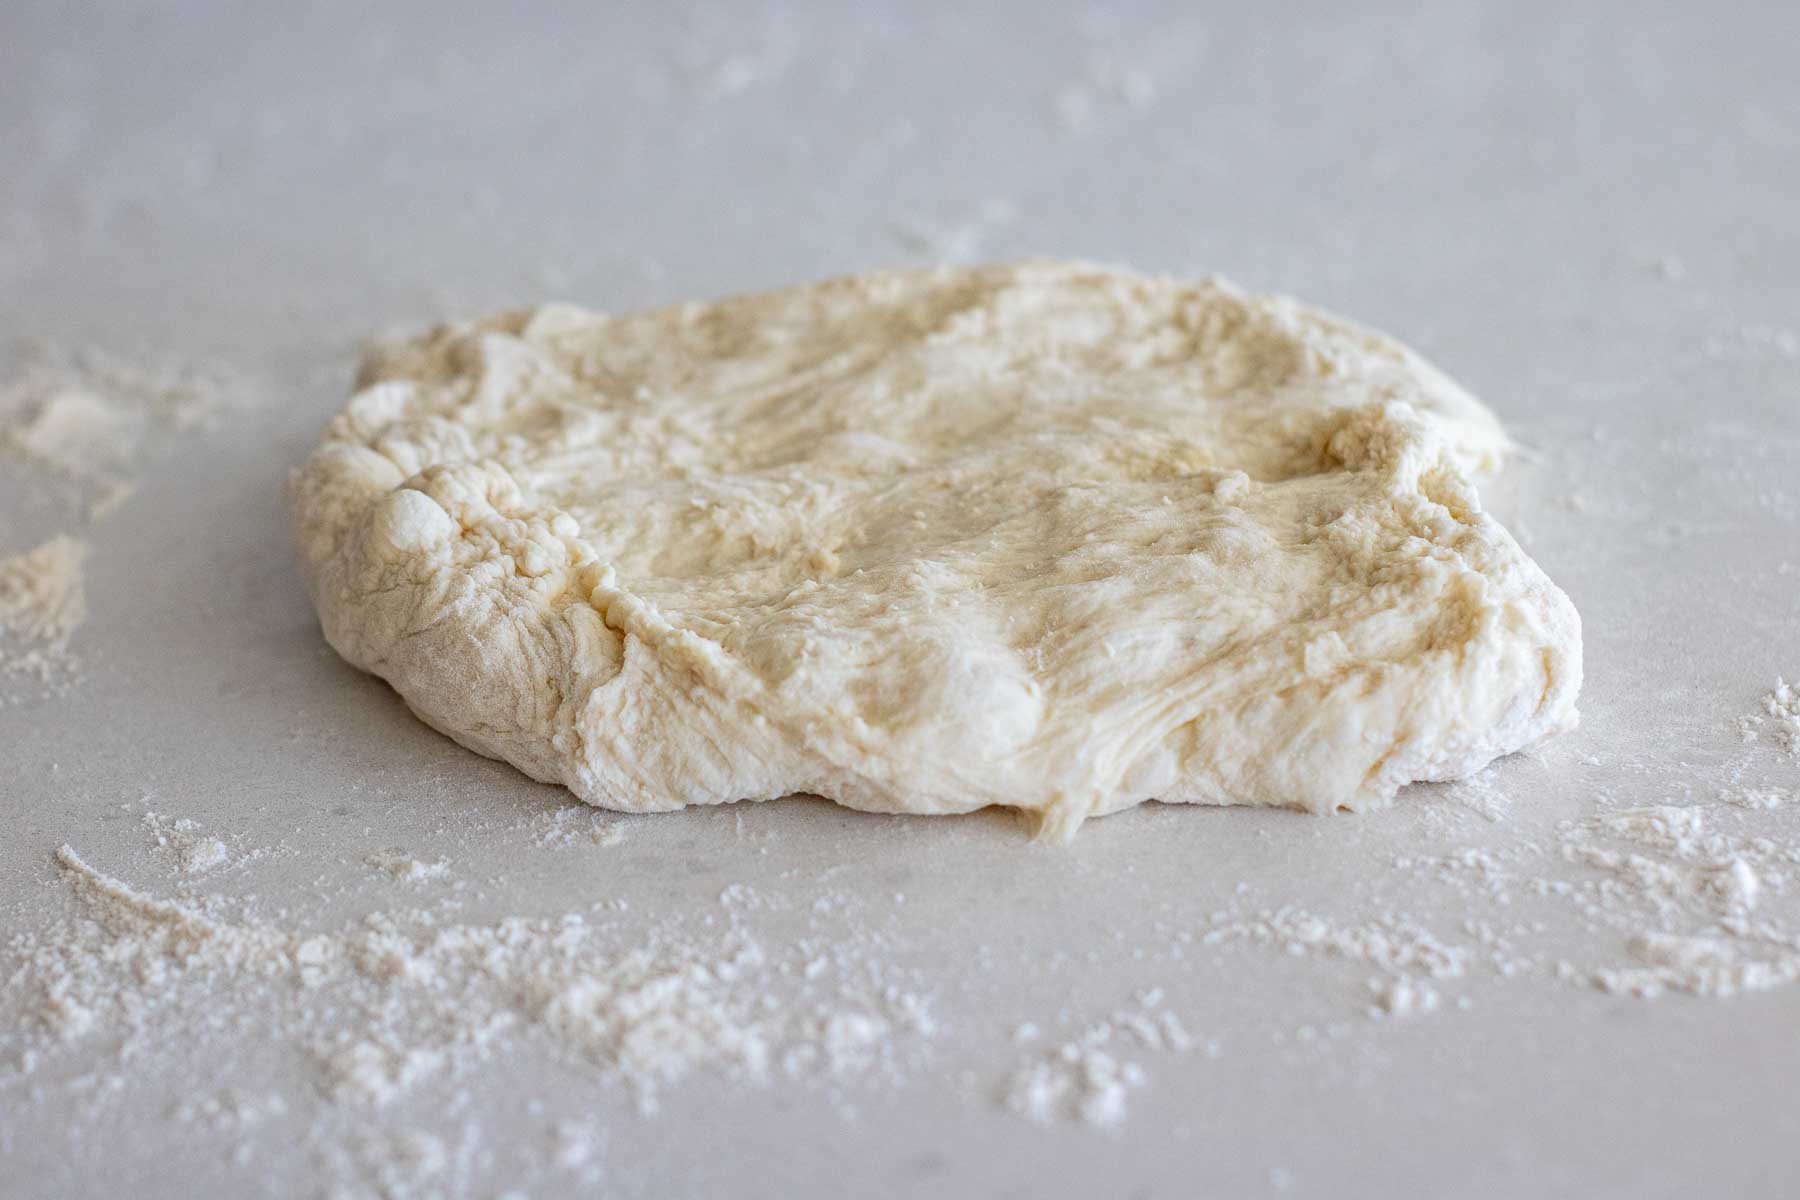 One part of the dough opened in a rectangle shape on a floured surface.